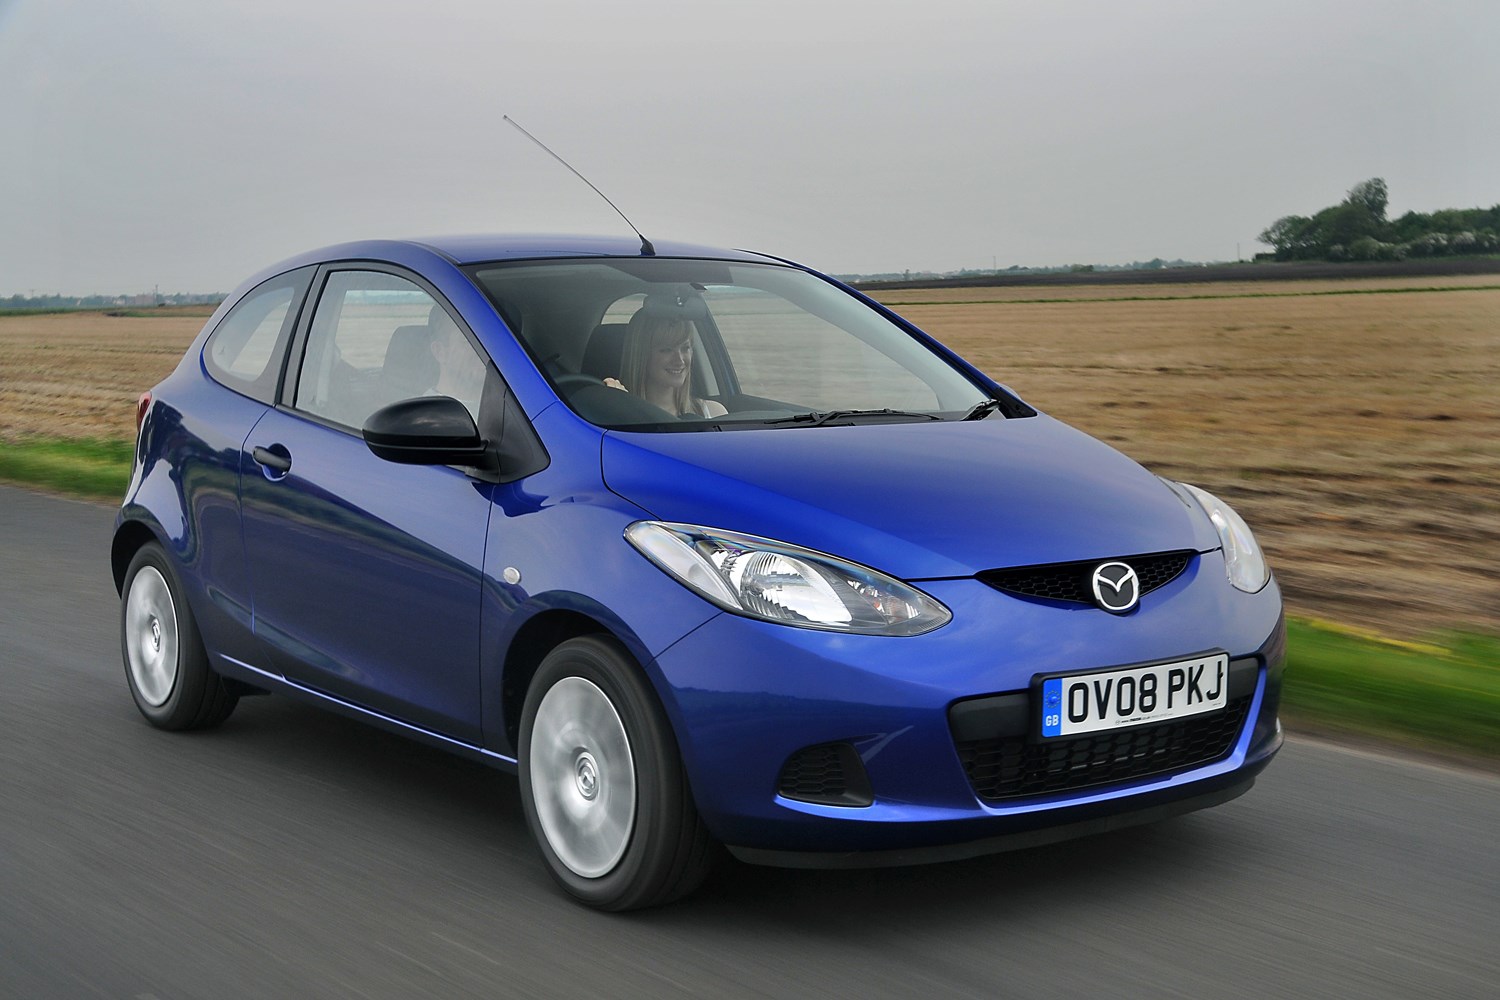 Used Mazda 2 Hatchback 07 15 Review Parkers